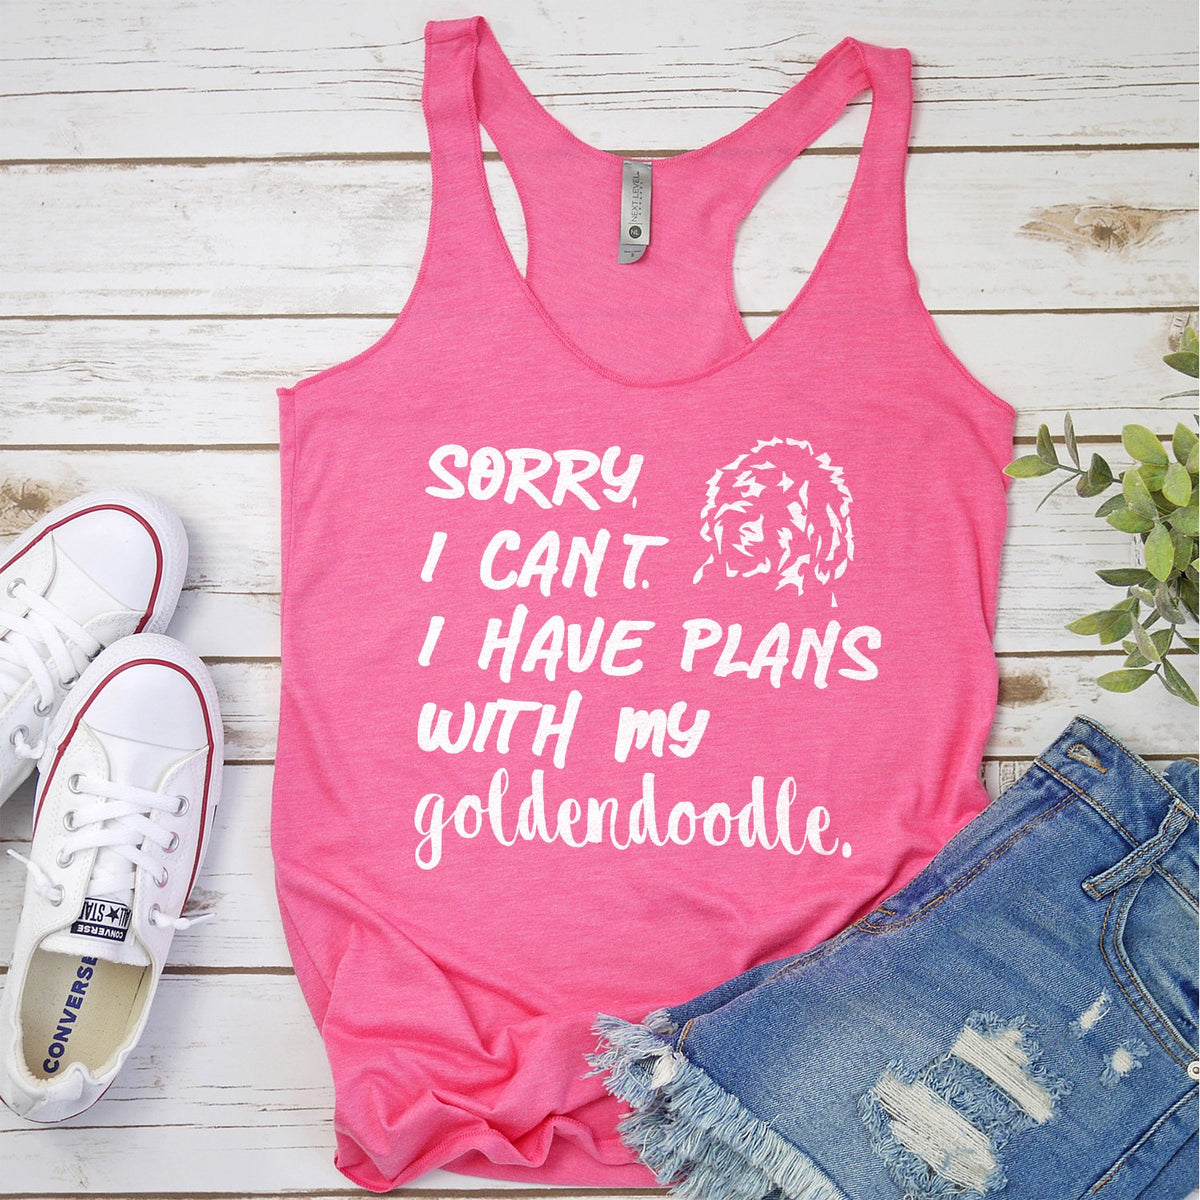 Sorry I Can&#39;t I Have Plans with My Goldendoodle - Tank Top Racerback